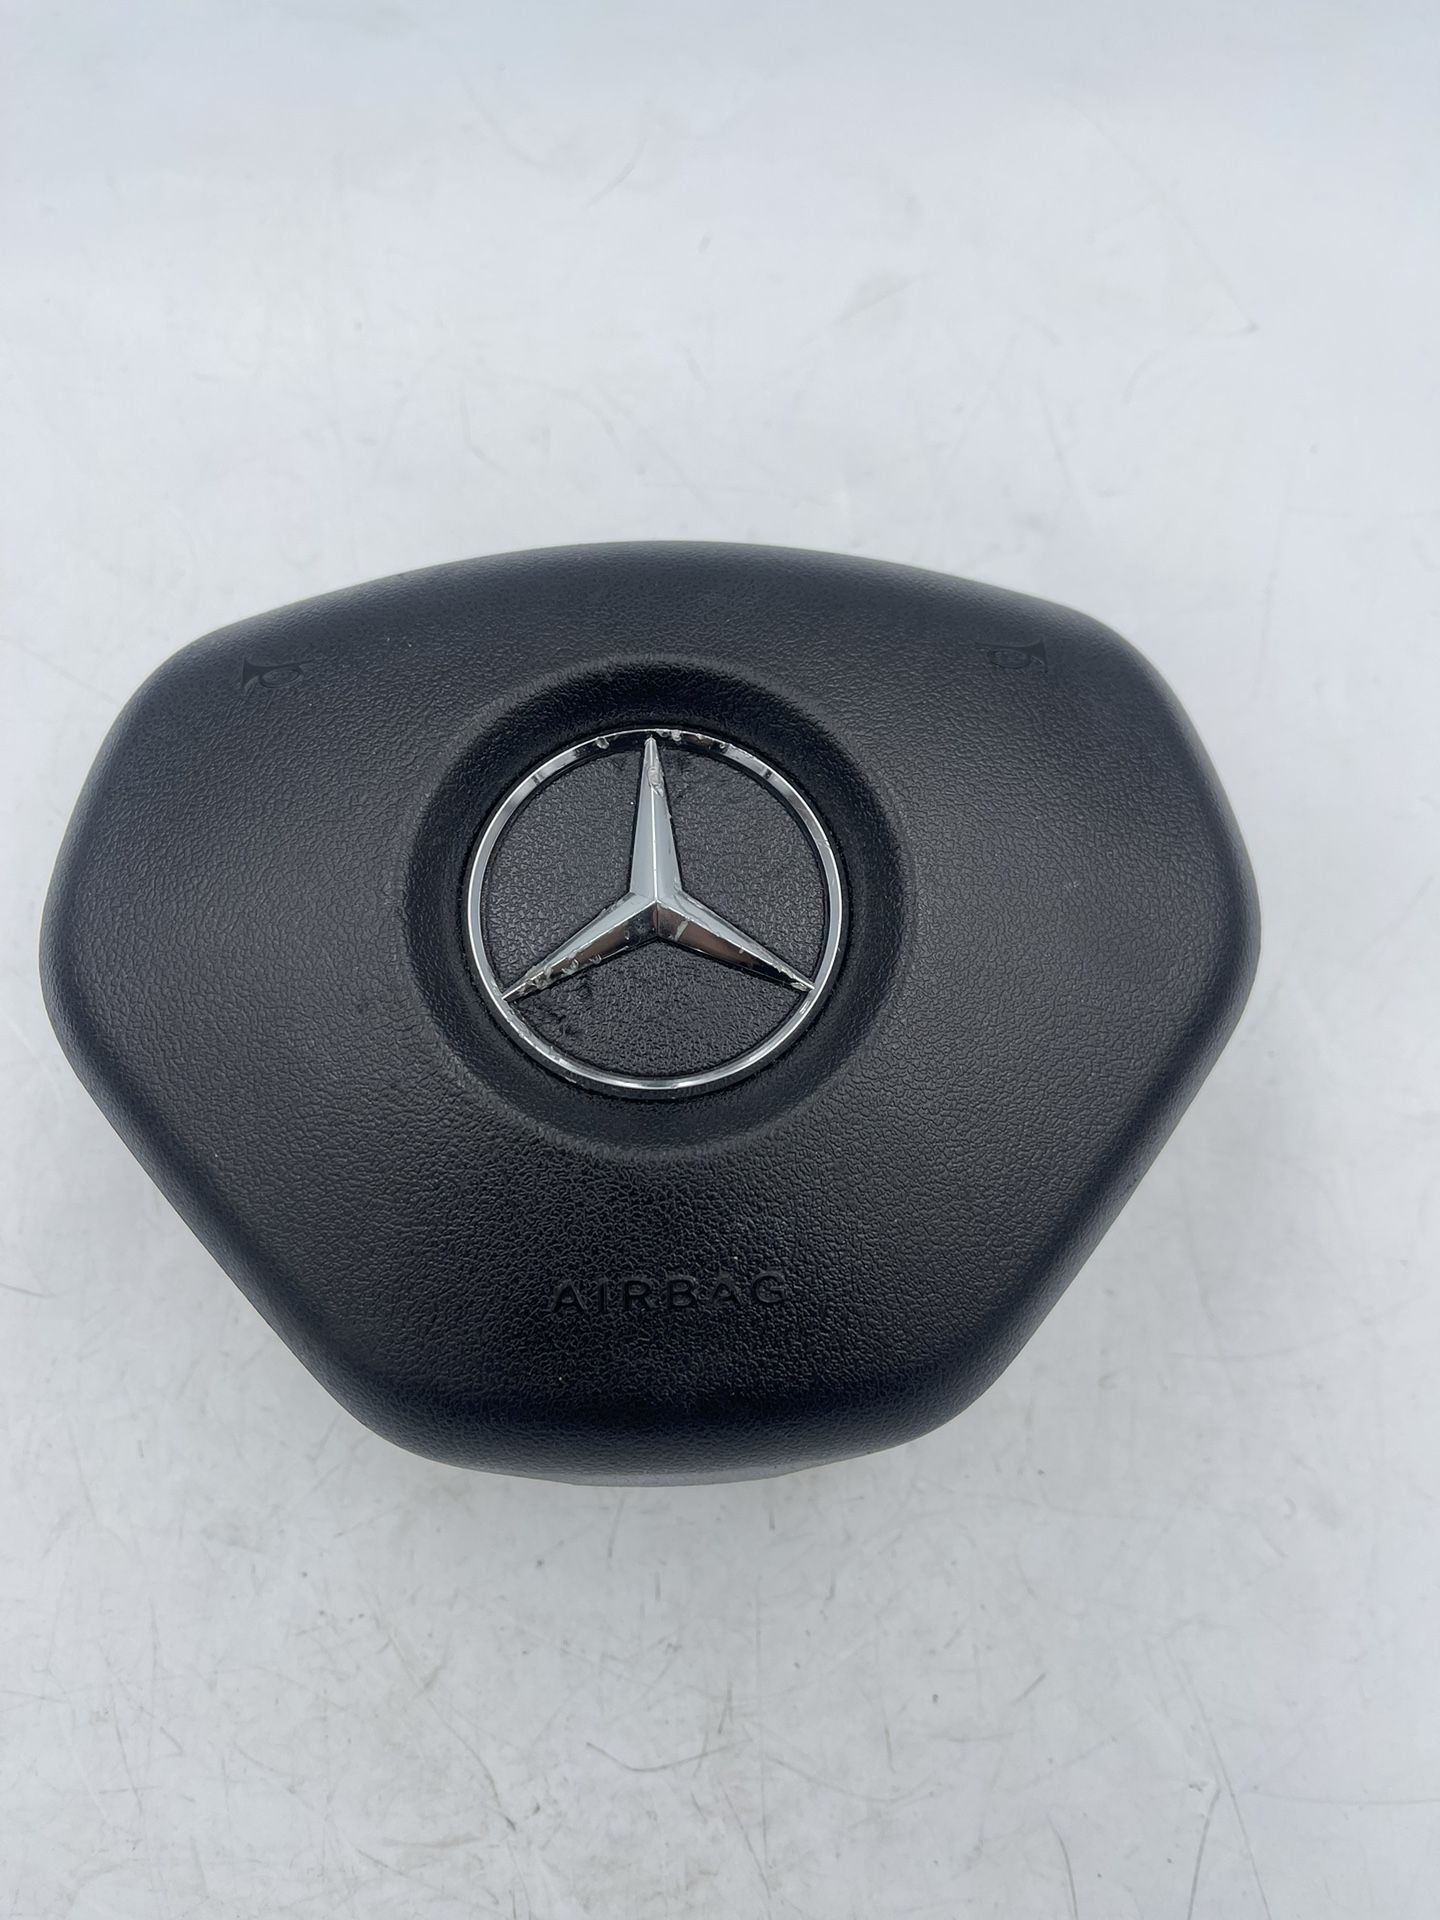 Mercedes CLA GLA  Steering Driver Wheel Safety  Black  14 20  A000(contact info removed)